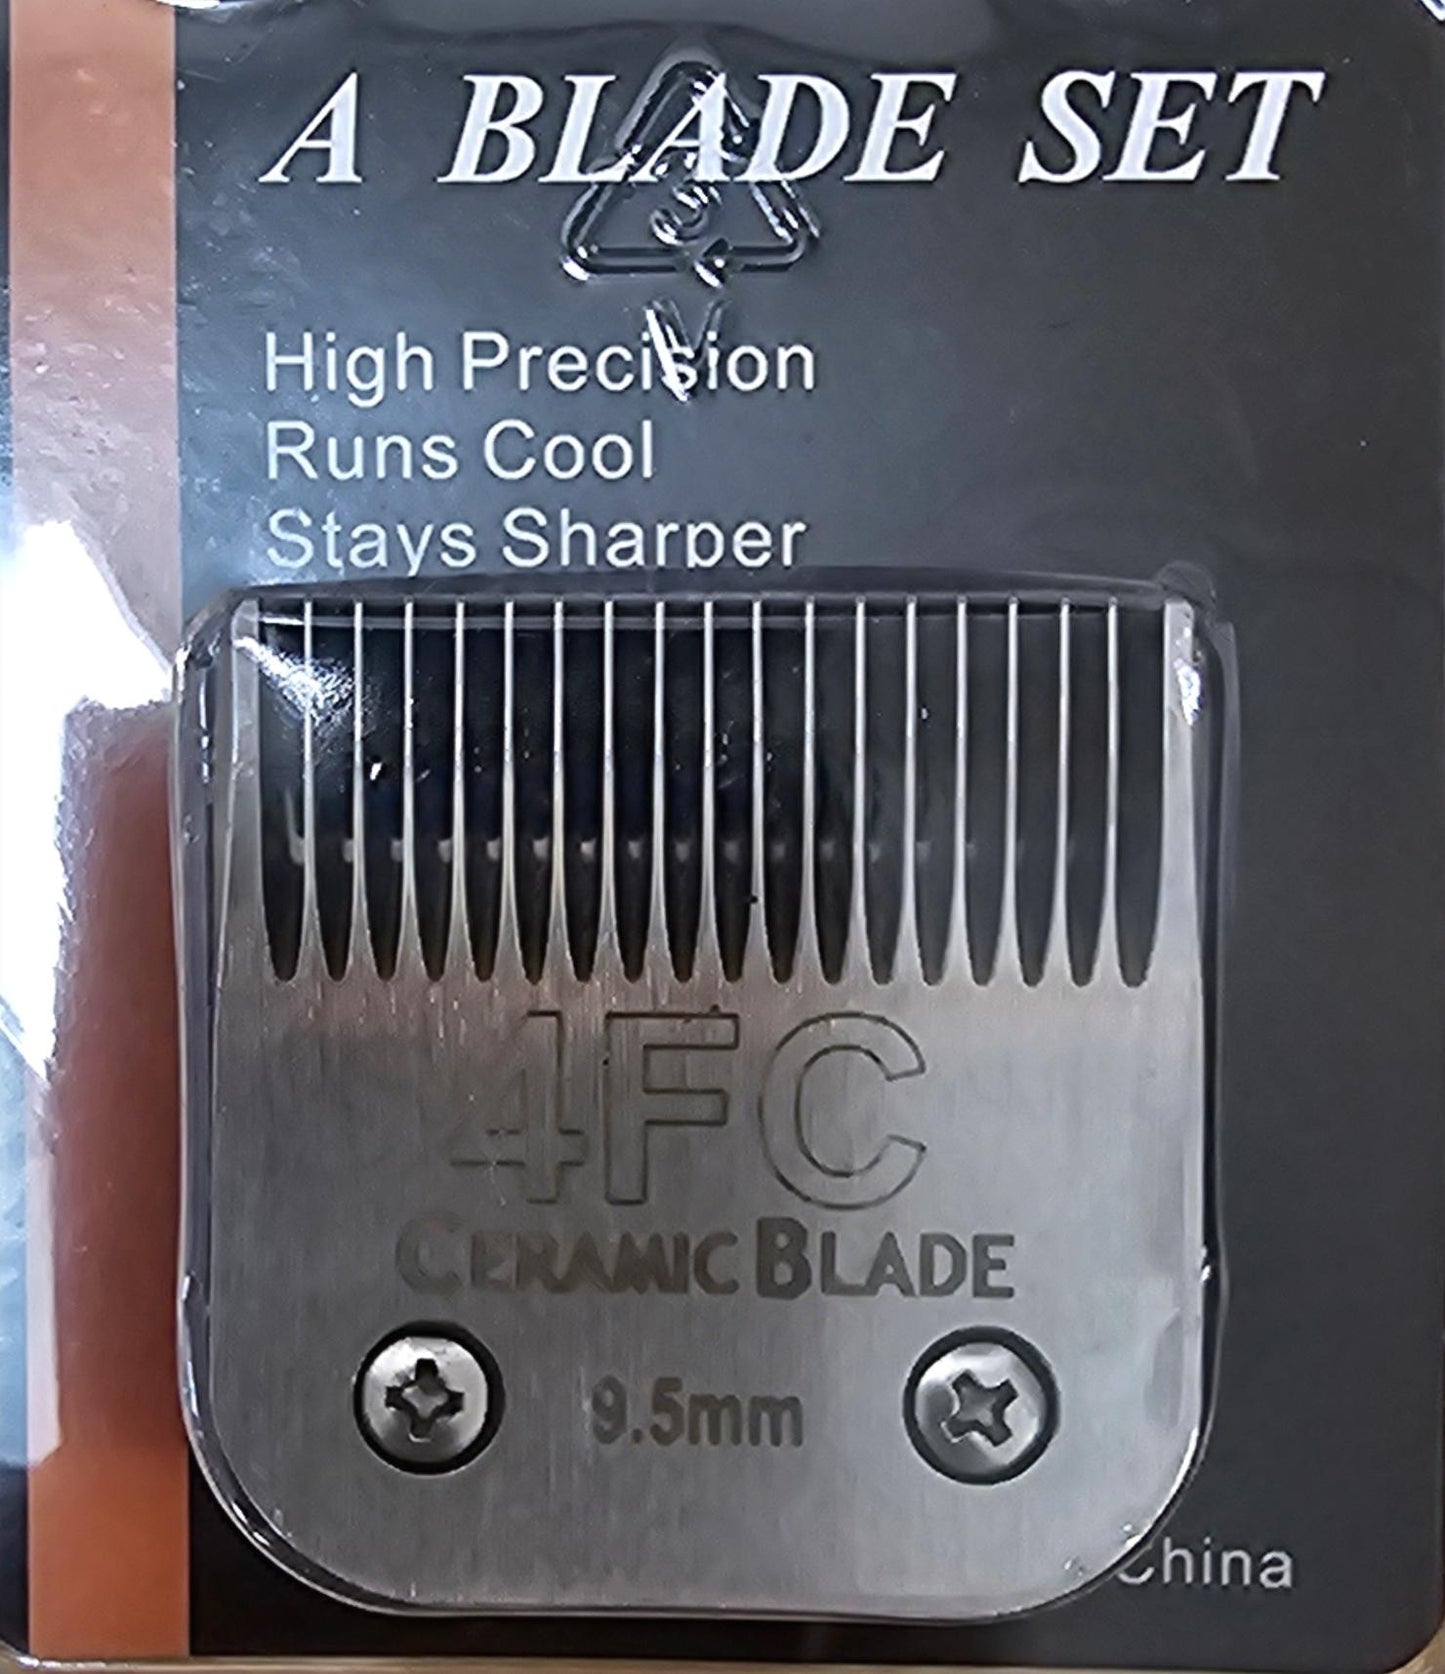 New Wide A5 Clipper Blades